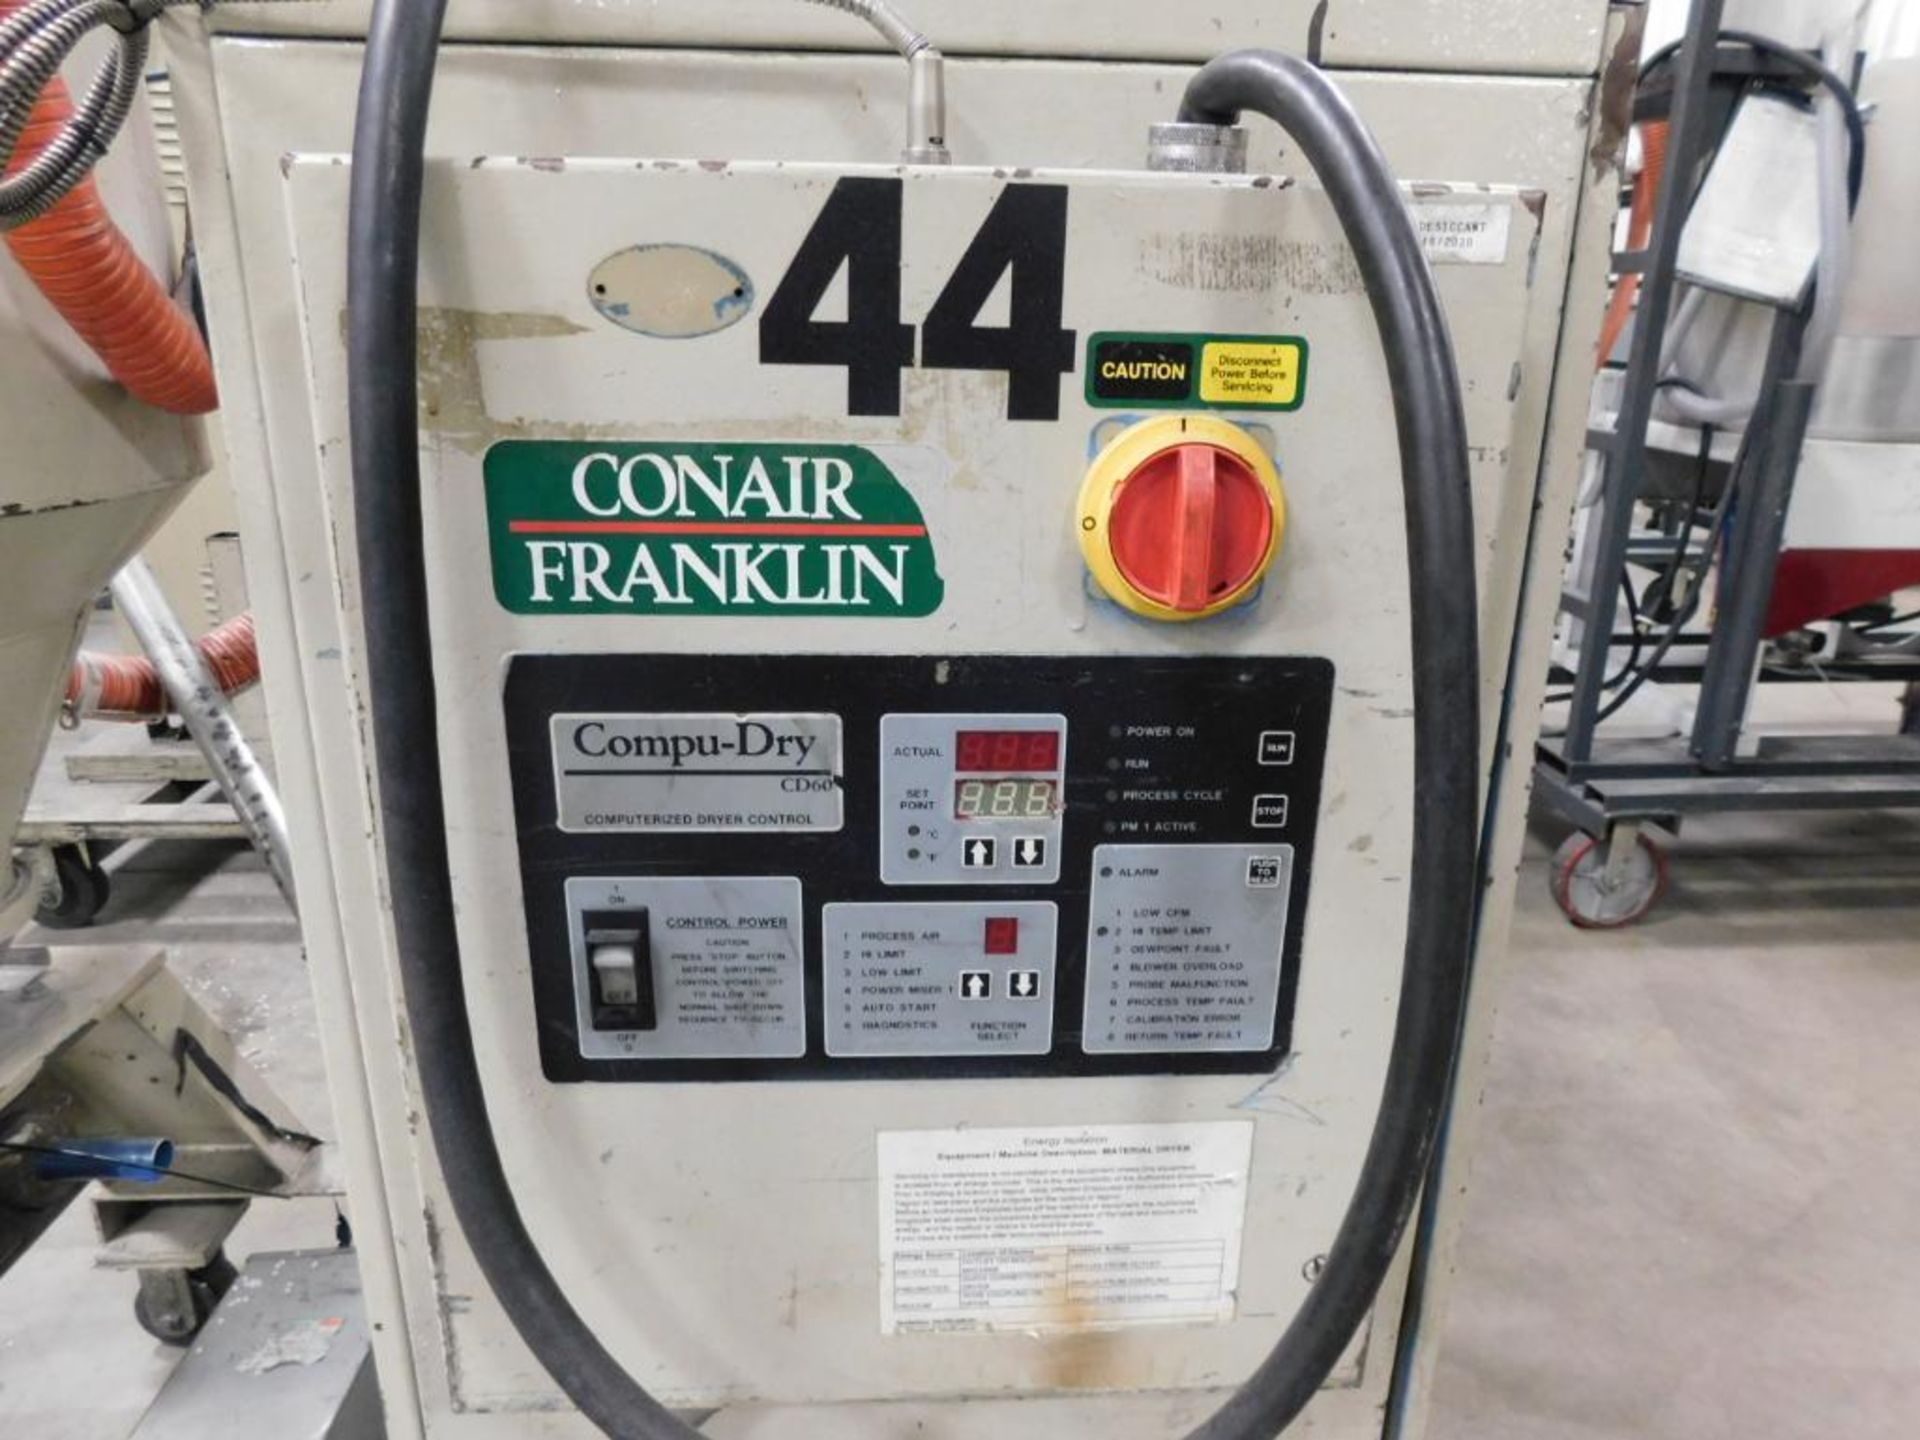 Conair Franklin D60A4000000 Portable Material Dryer, S/N 0D1728 - Image 4 of 5